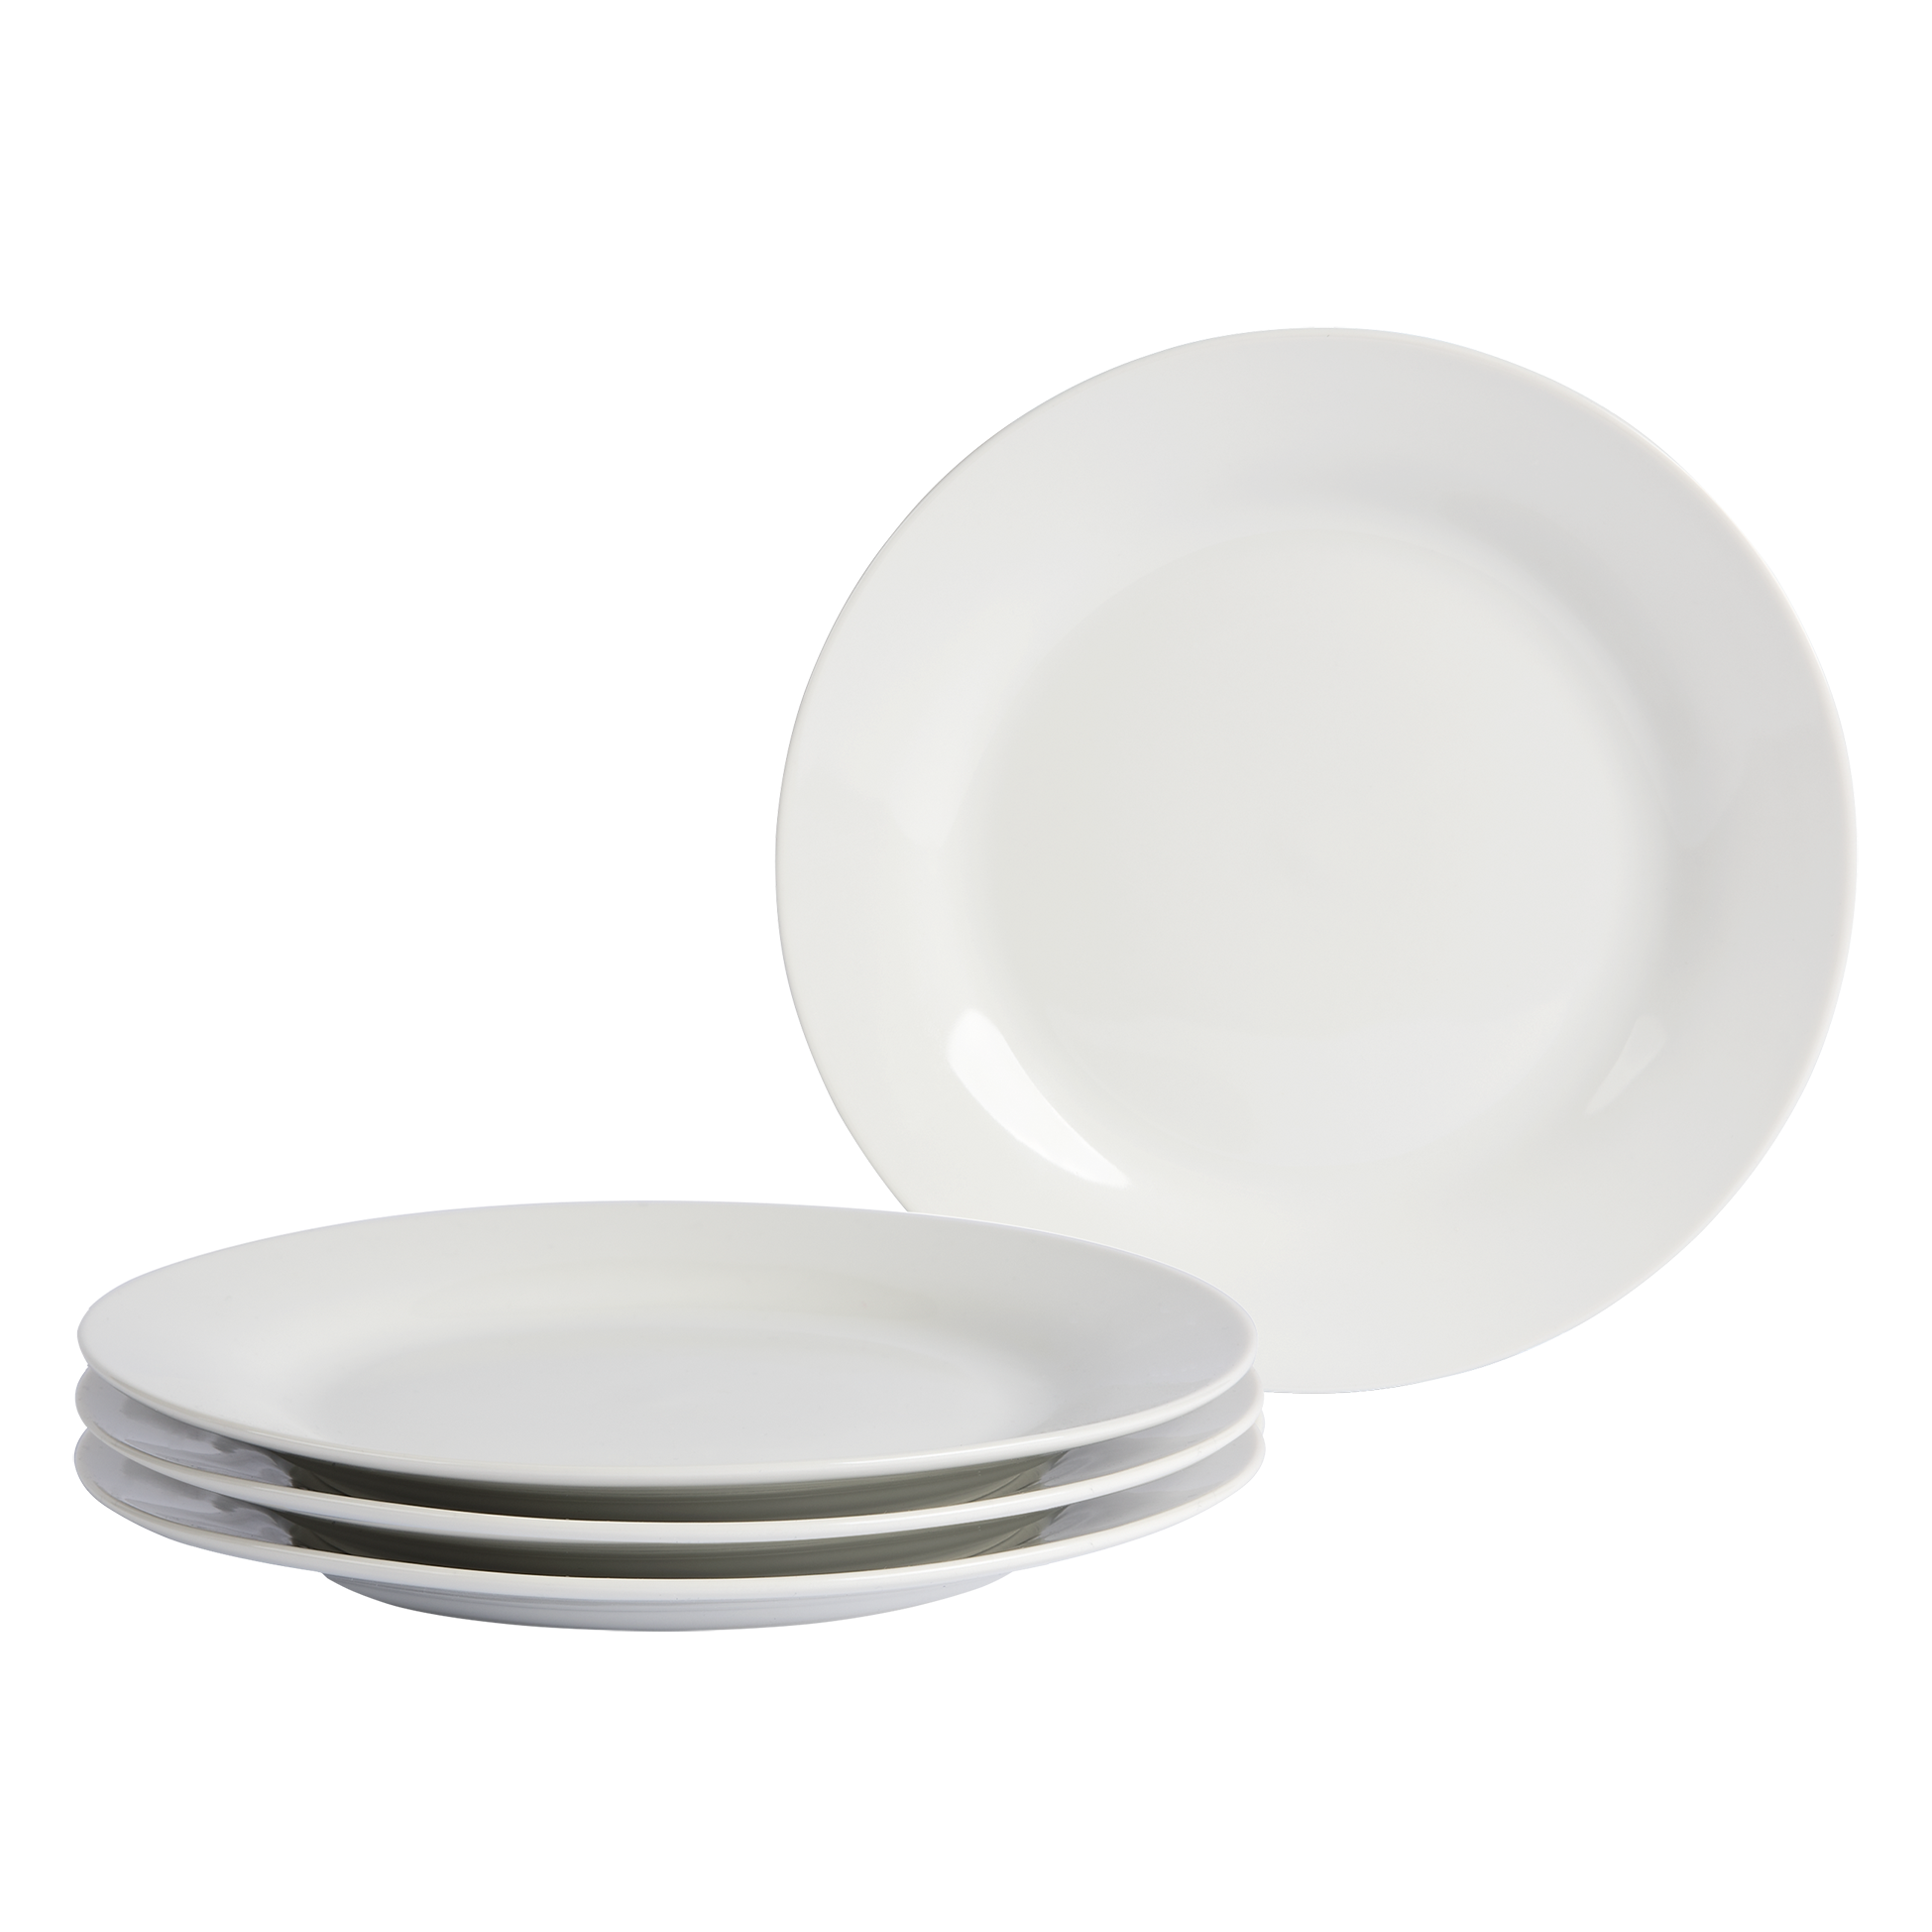 Set of 12 plates, stacked and showing one plate up on edge.